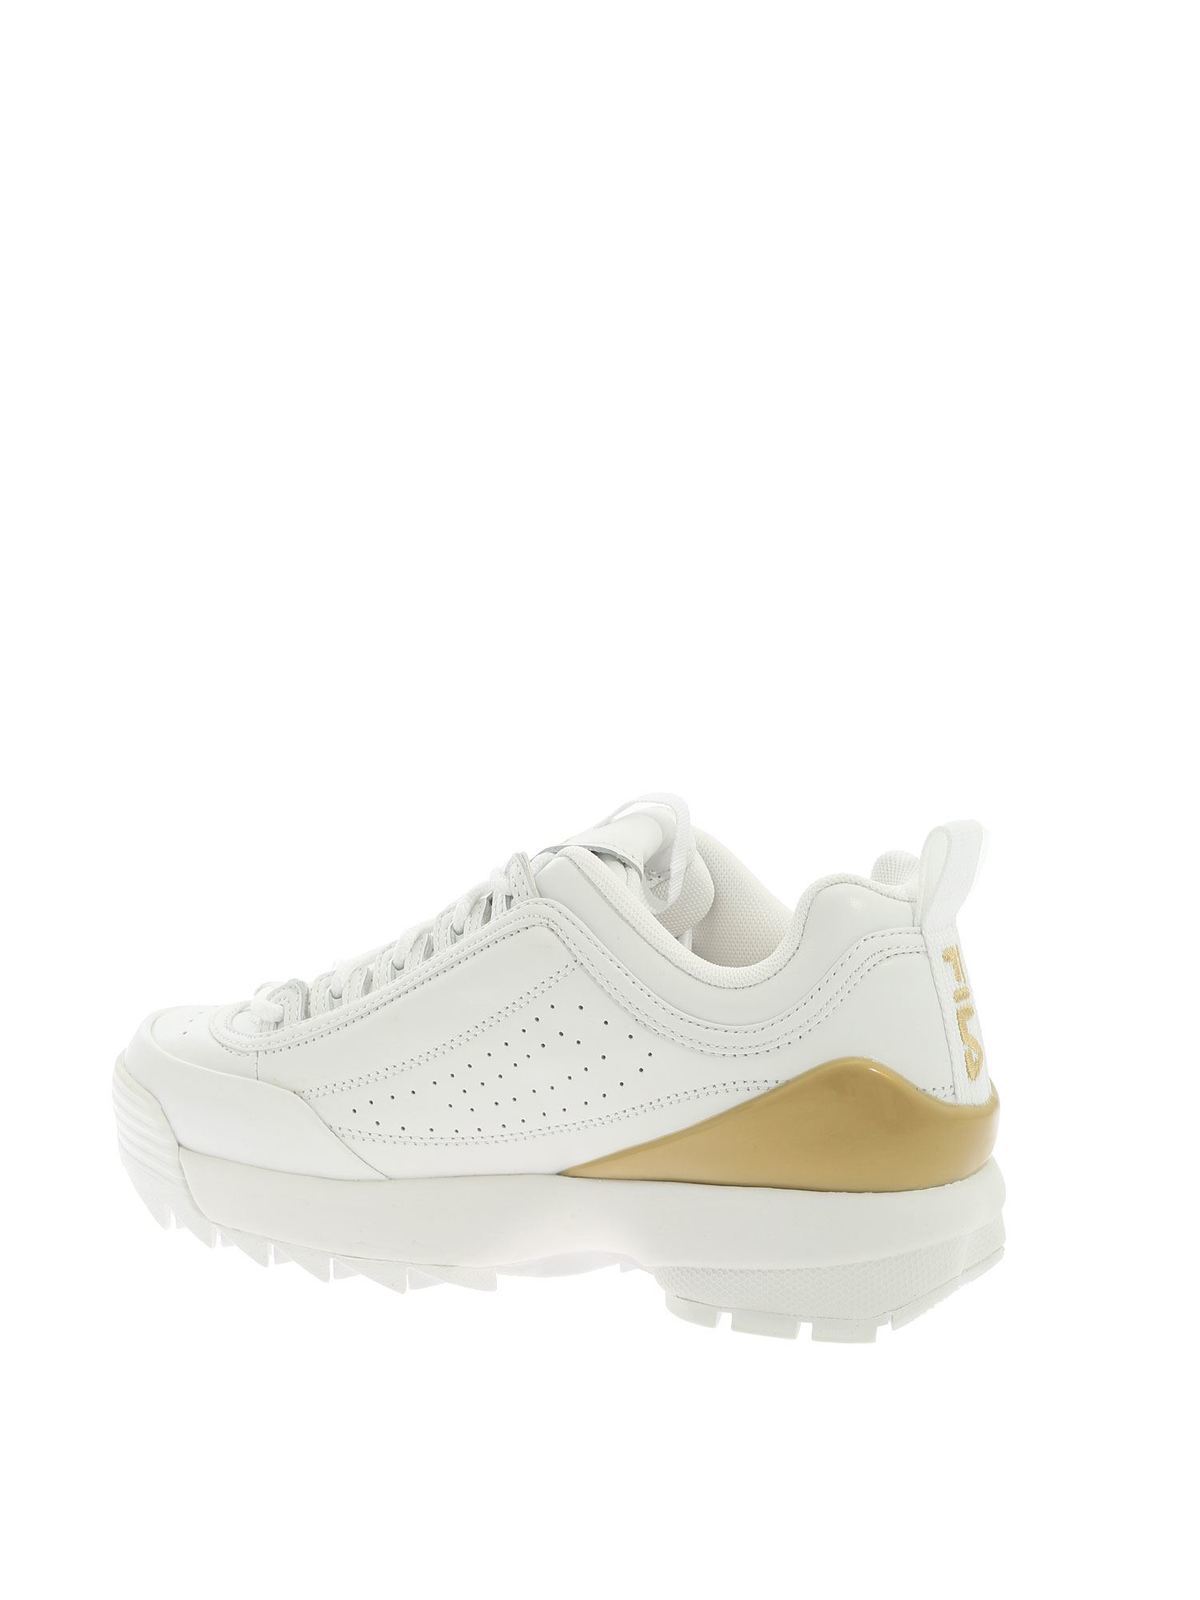 Leninisme vermomming schelp Trainers Fila - Disruptor Premium sneakers in white and gold - 10108621FG